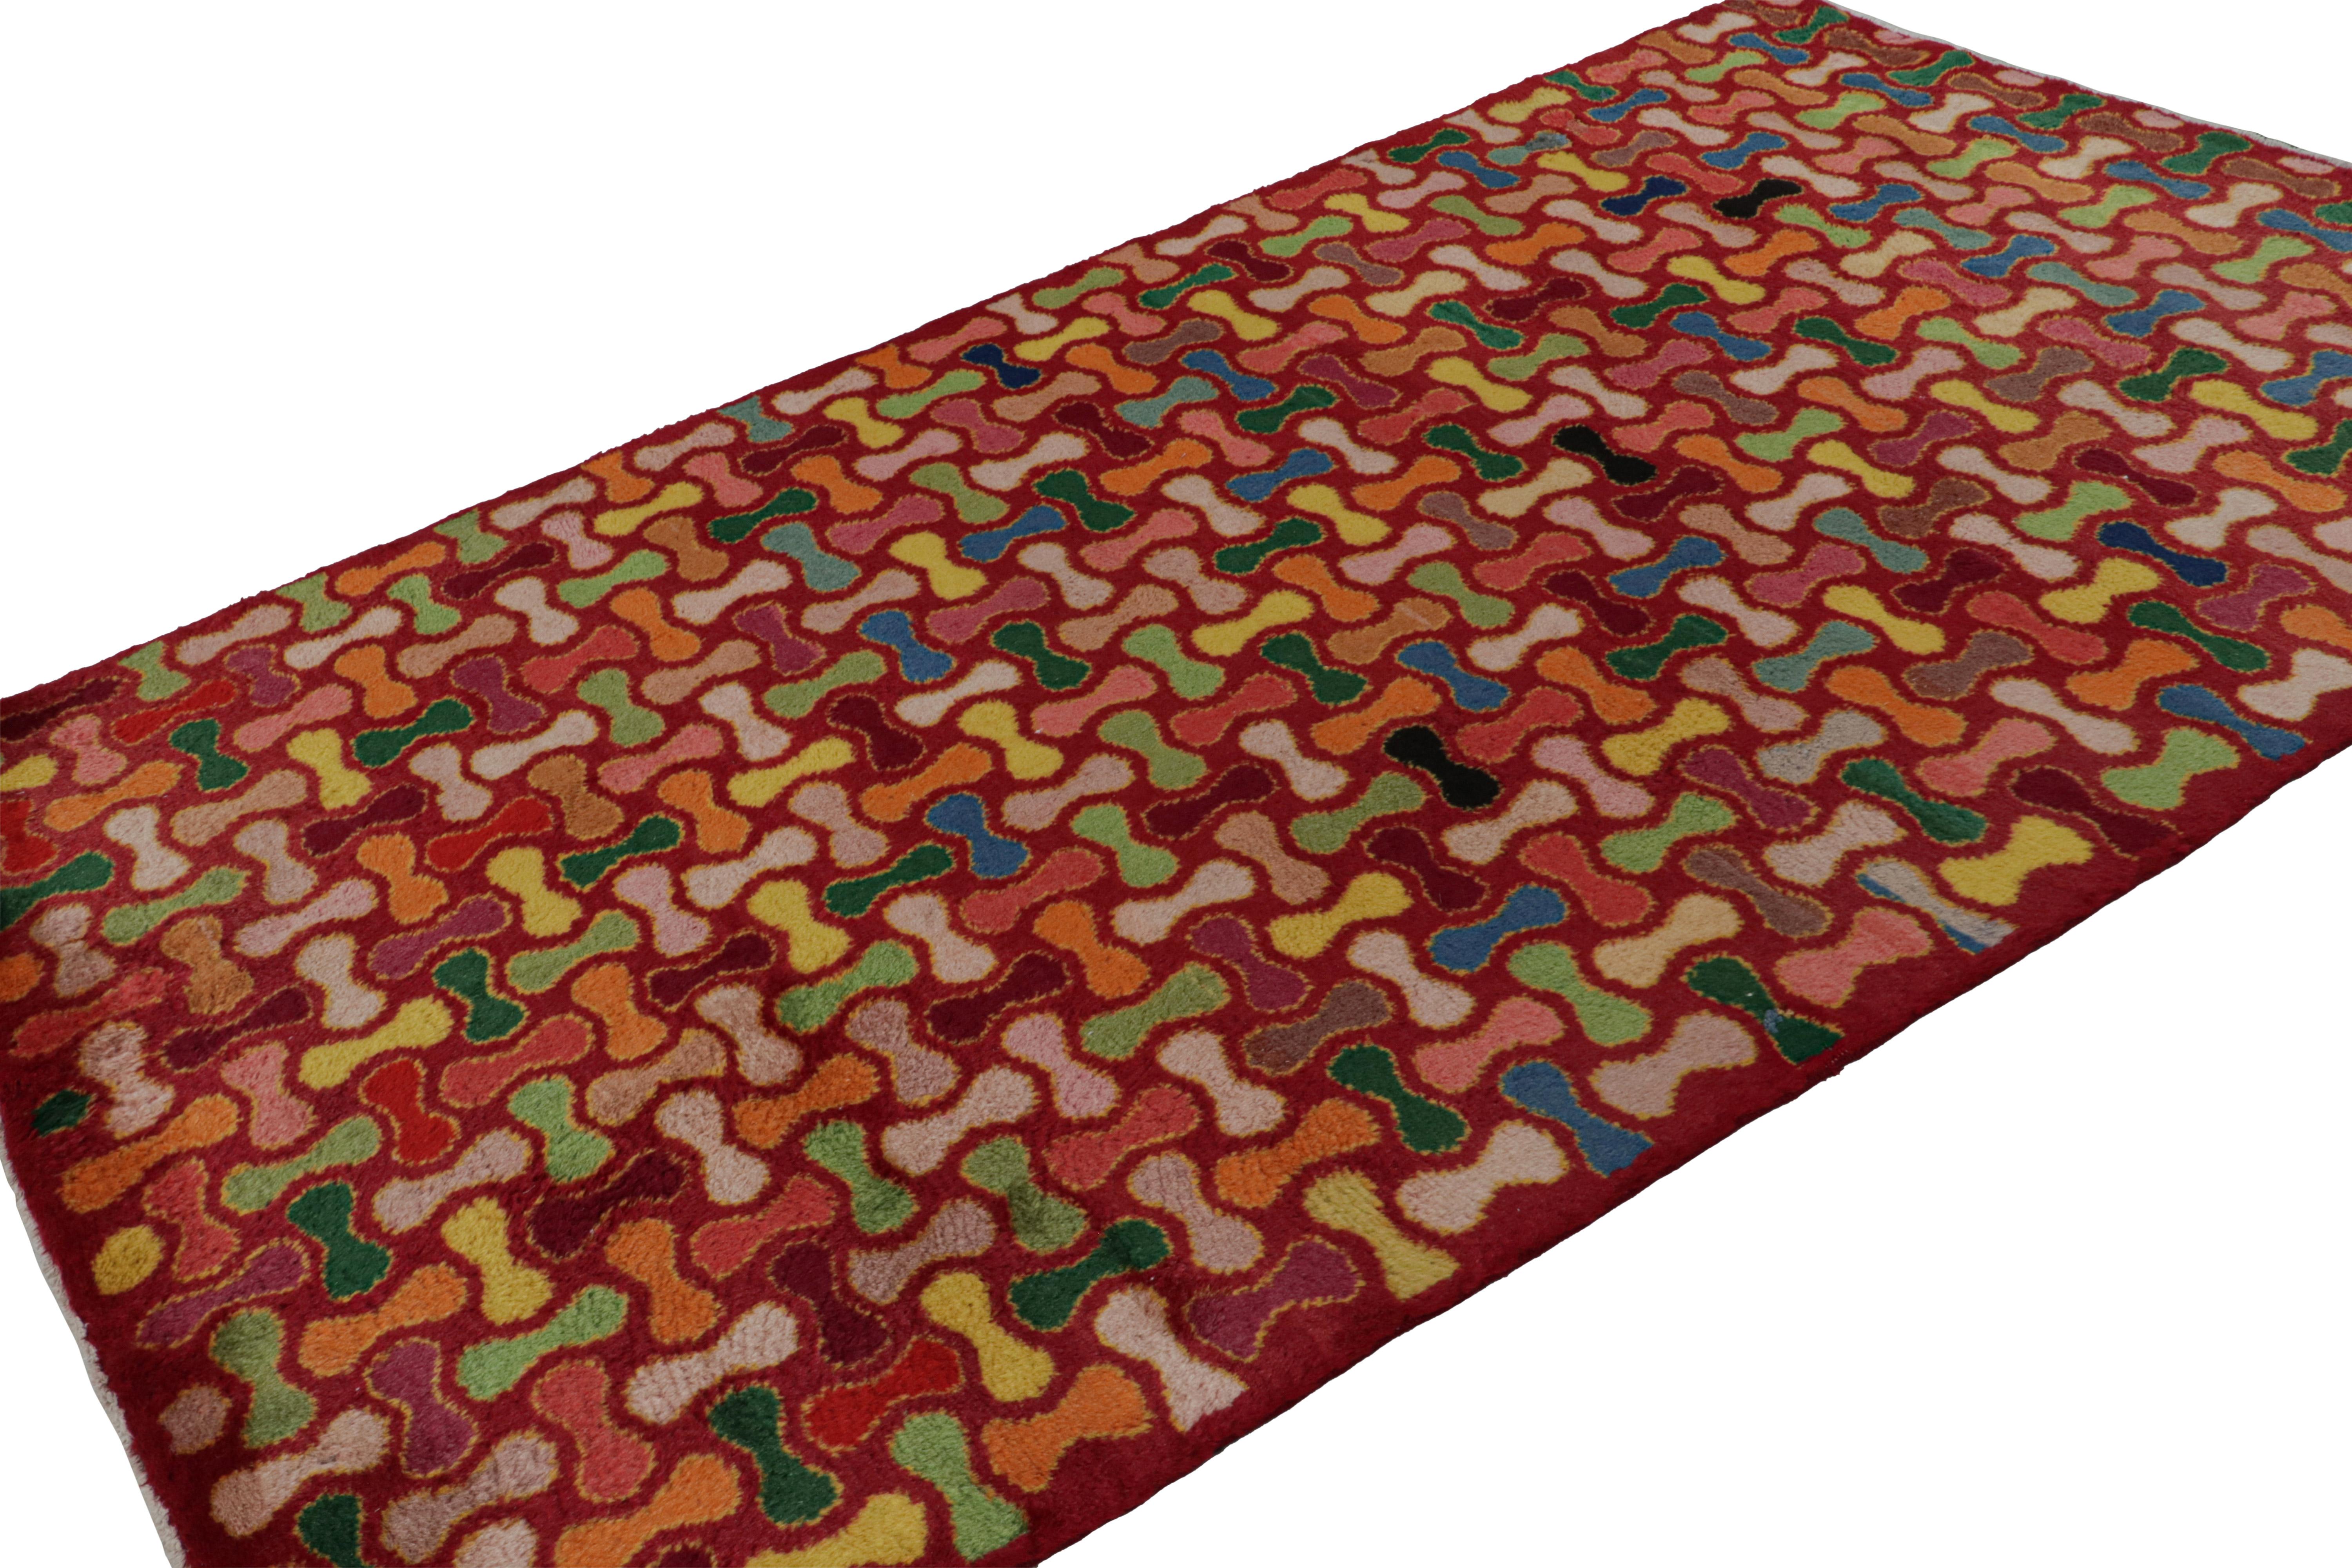 Hand-knotted in wool, circa 1960 - 1970, this 5x9 vintage Müren Art Deco rug features a unique polychromatic geometric design on a rich red field. This is a quintessential Müren piece for its playful sense of movement, choices of color and the rare